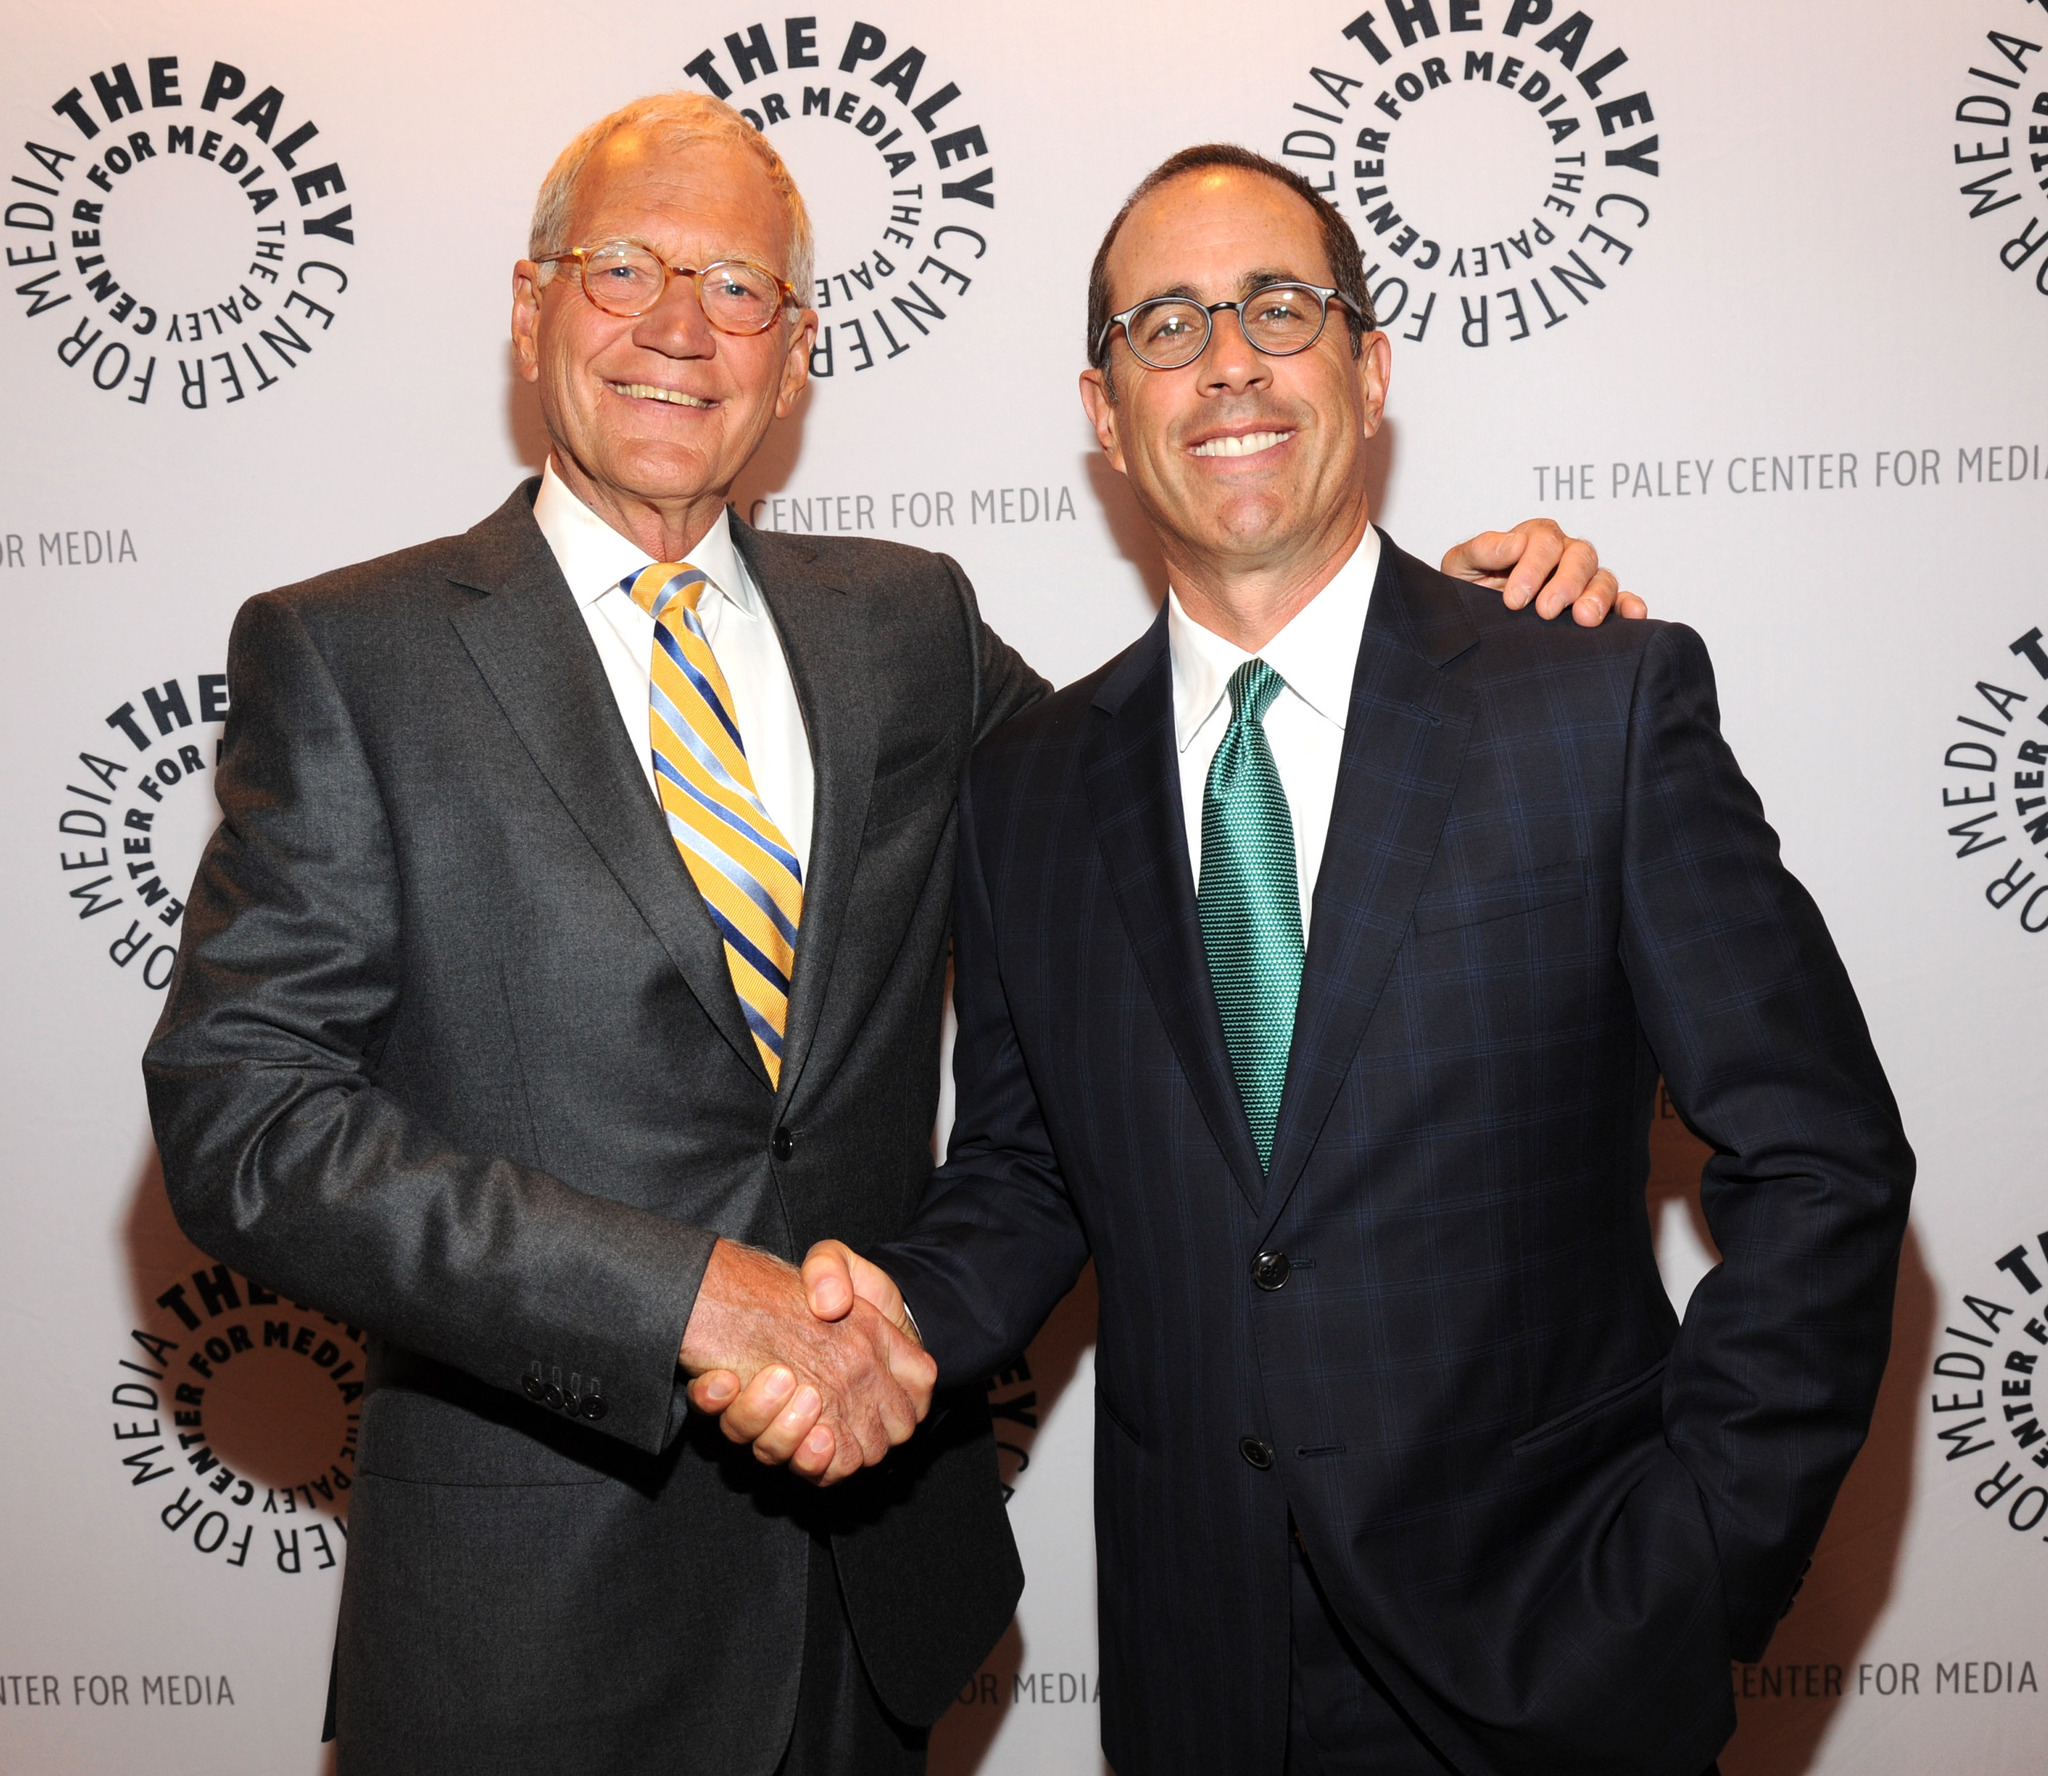 David Letterman and Jerry Seinfeld backstage before they discuss Crackle's Comedians in Cars Getting Coffee at The Paley Center For Media on June 9, 2014 in New York City.